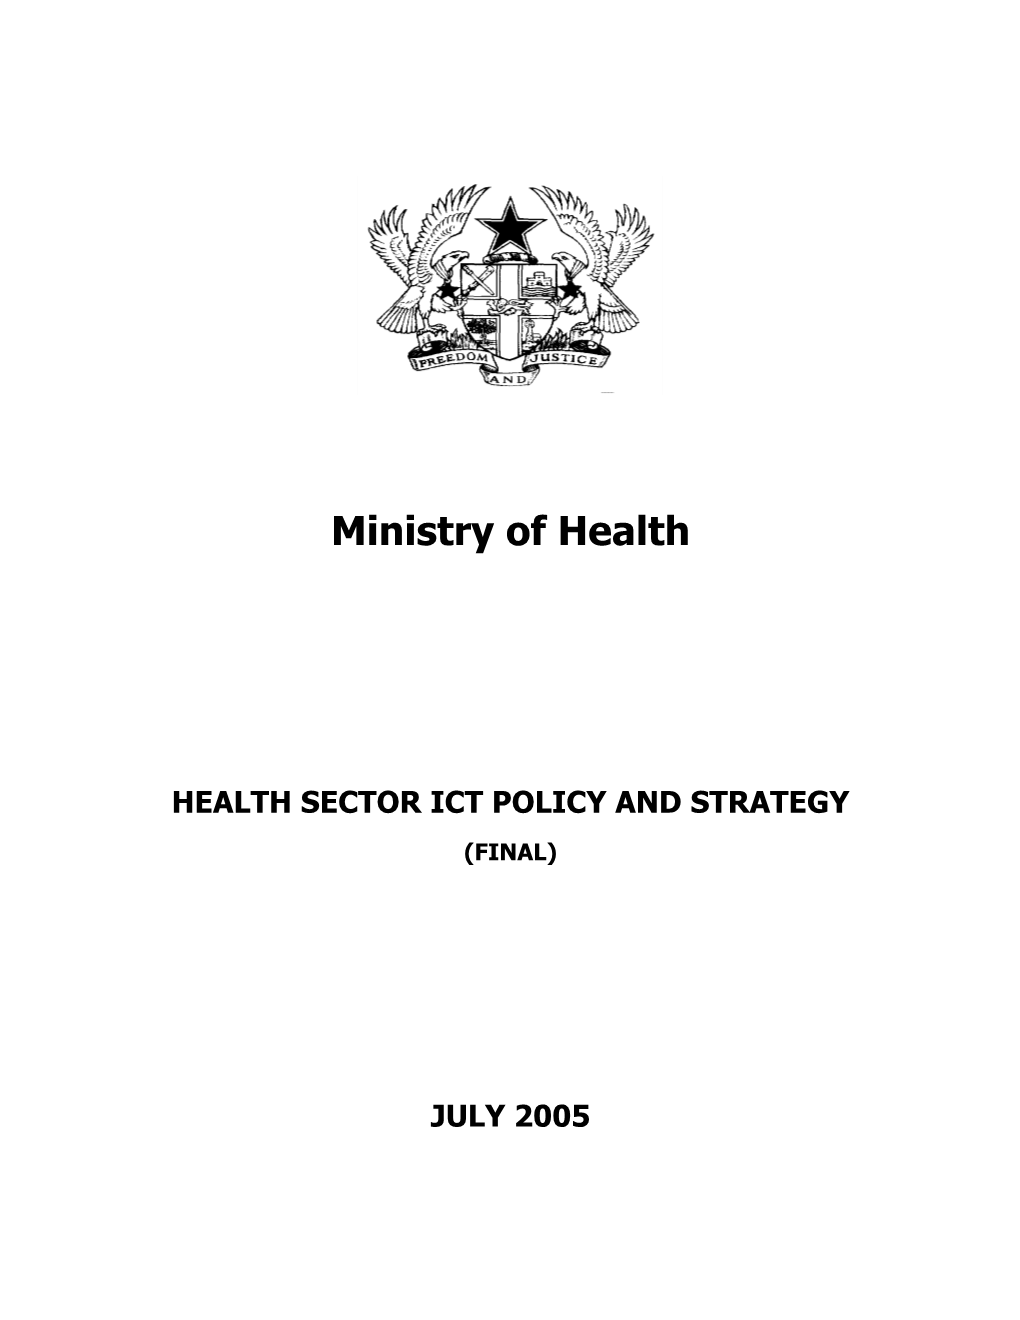 Health Sector Ict Policy and Strategy (Final)